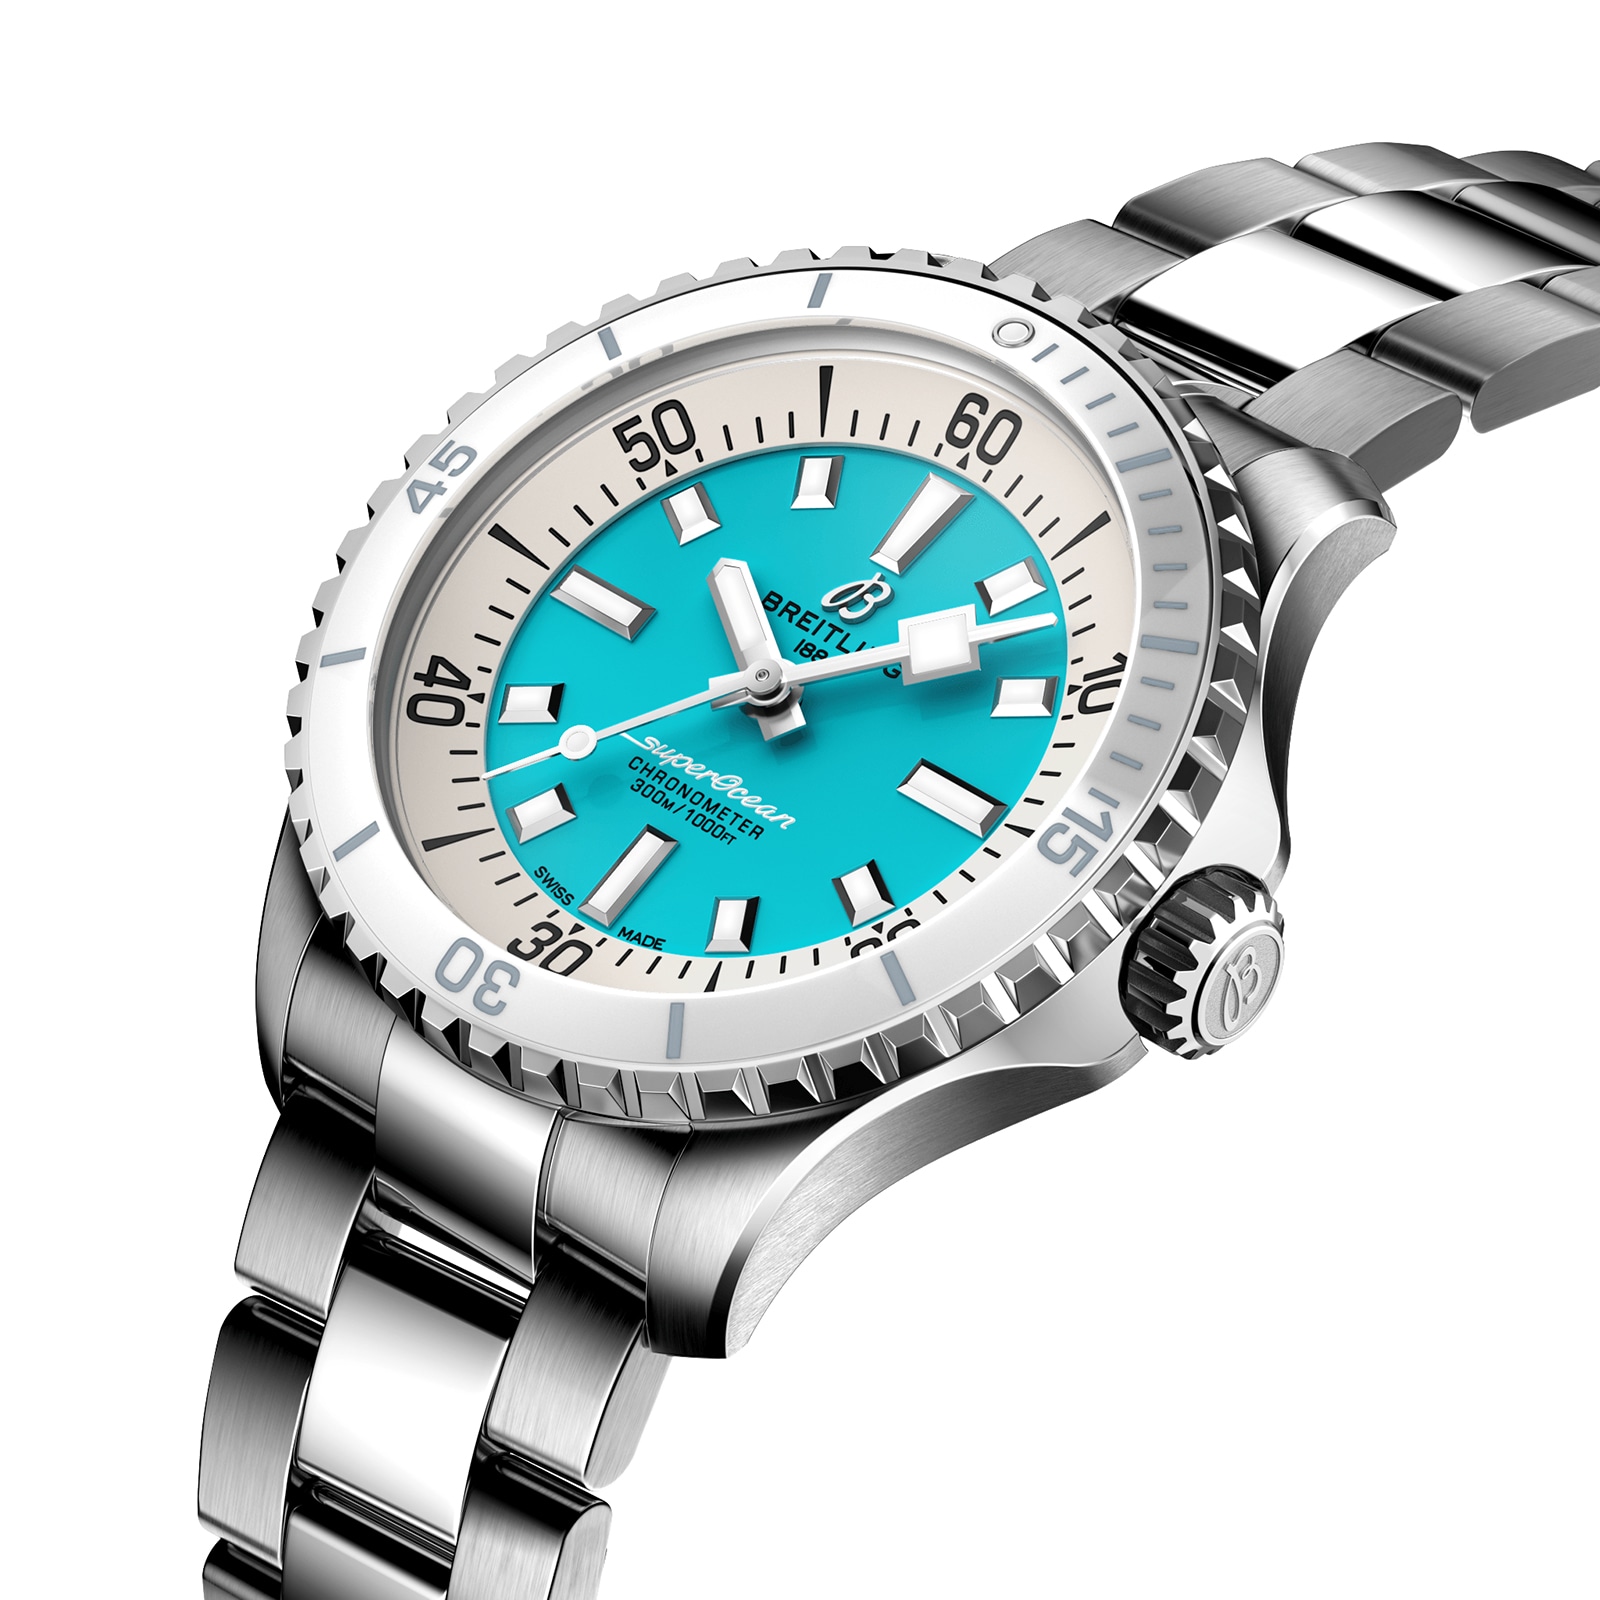 Sterling Silver and Turquoise Ladies Watch tips WL413